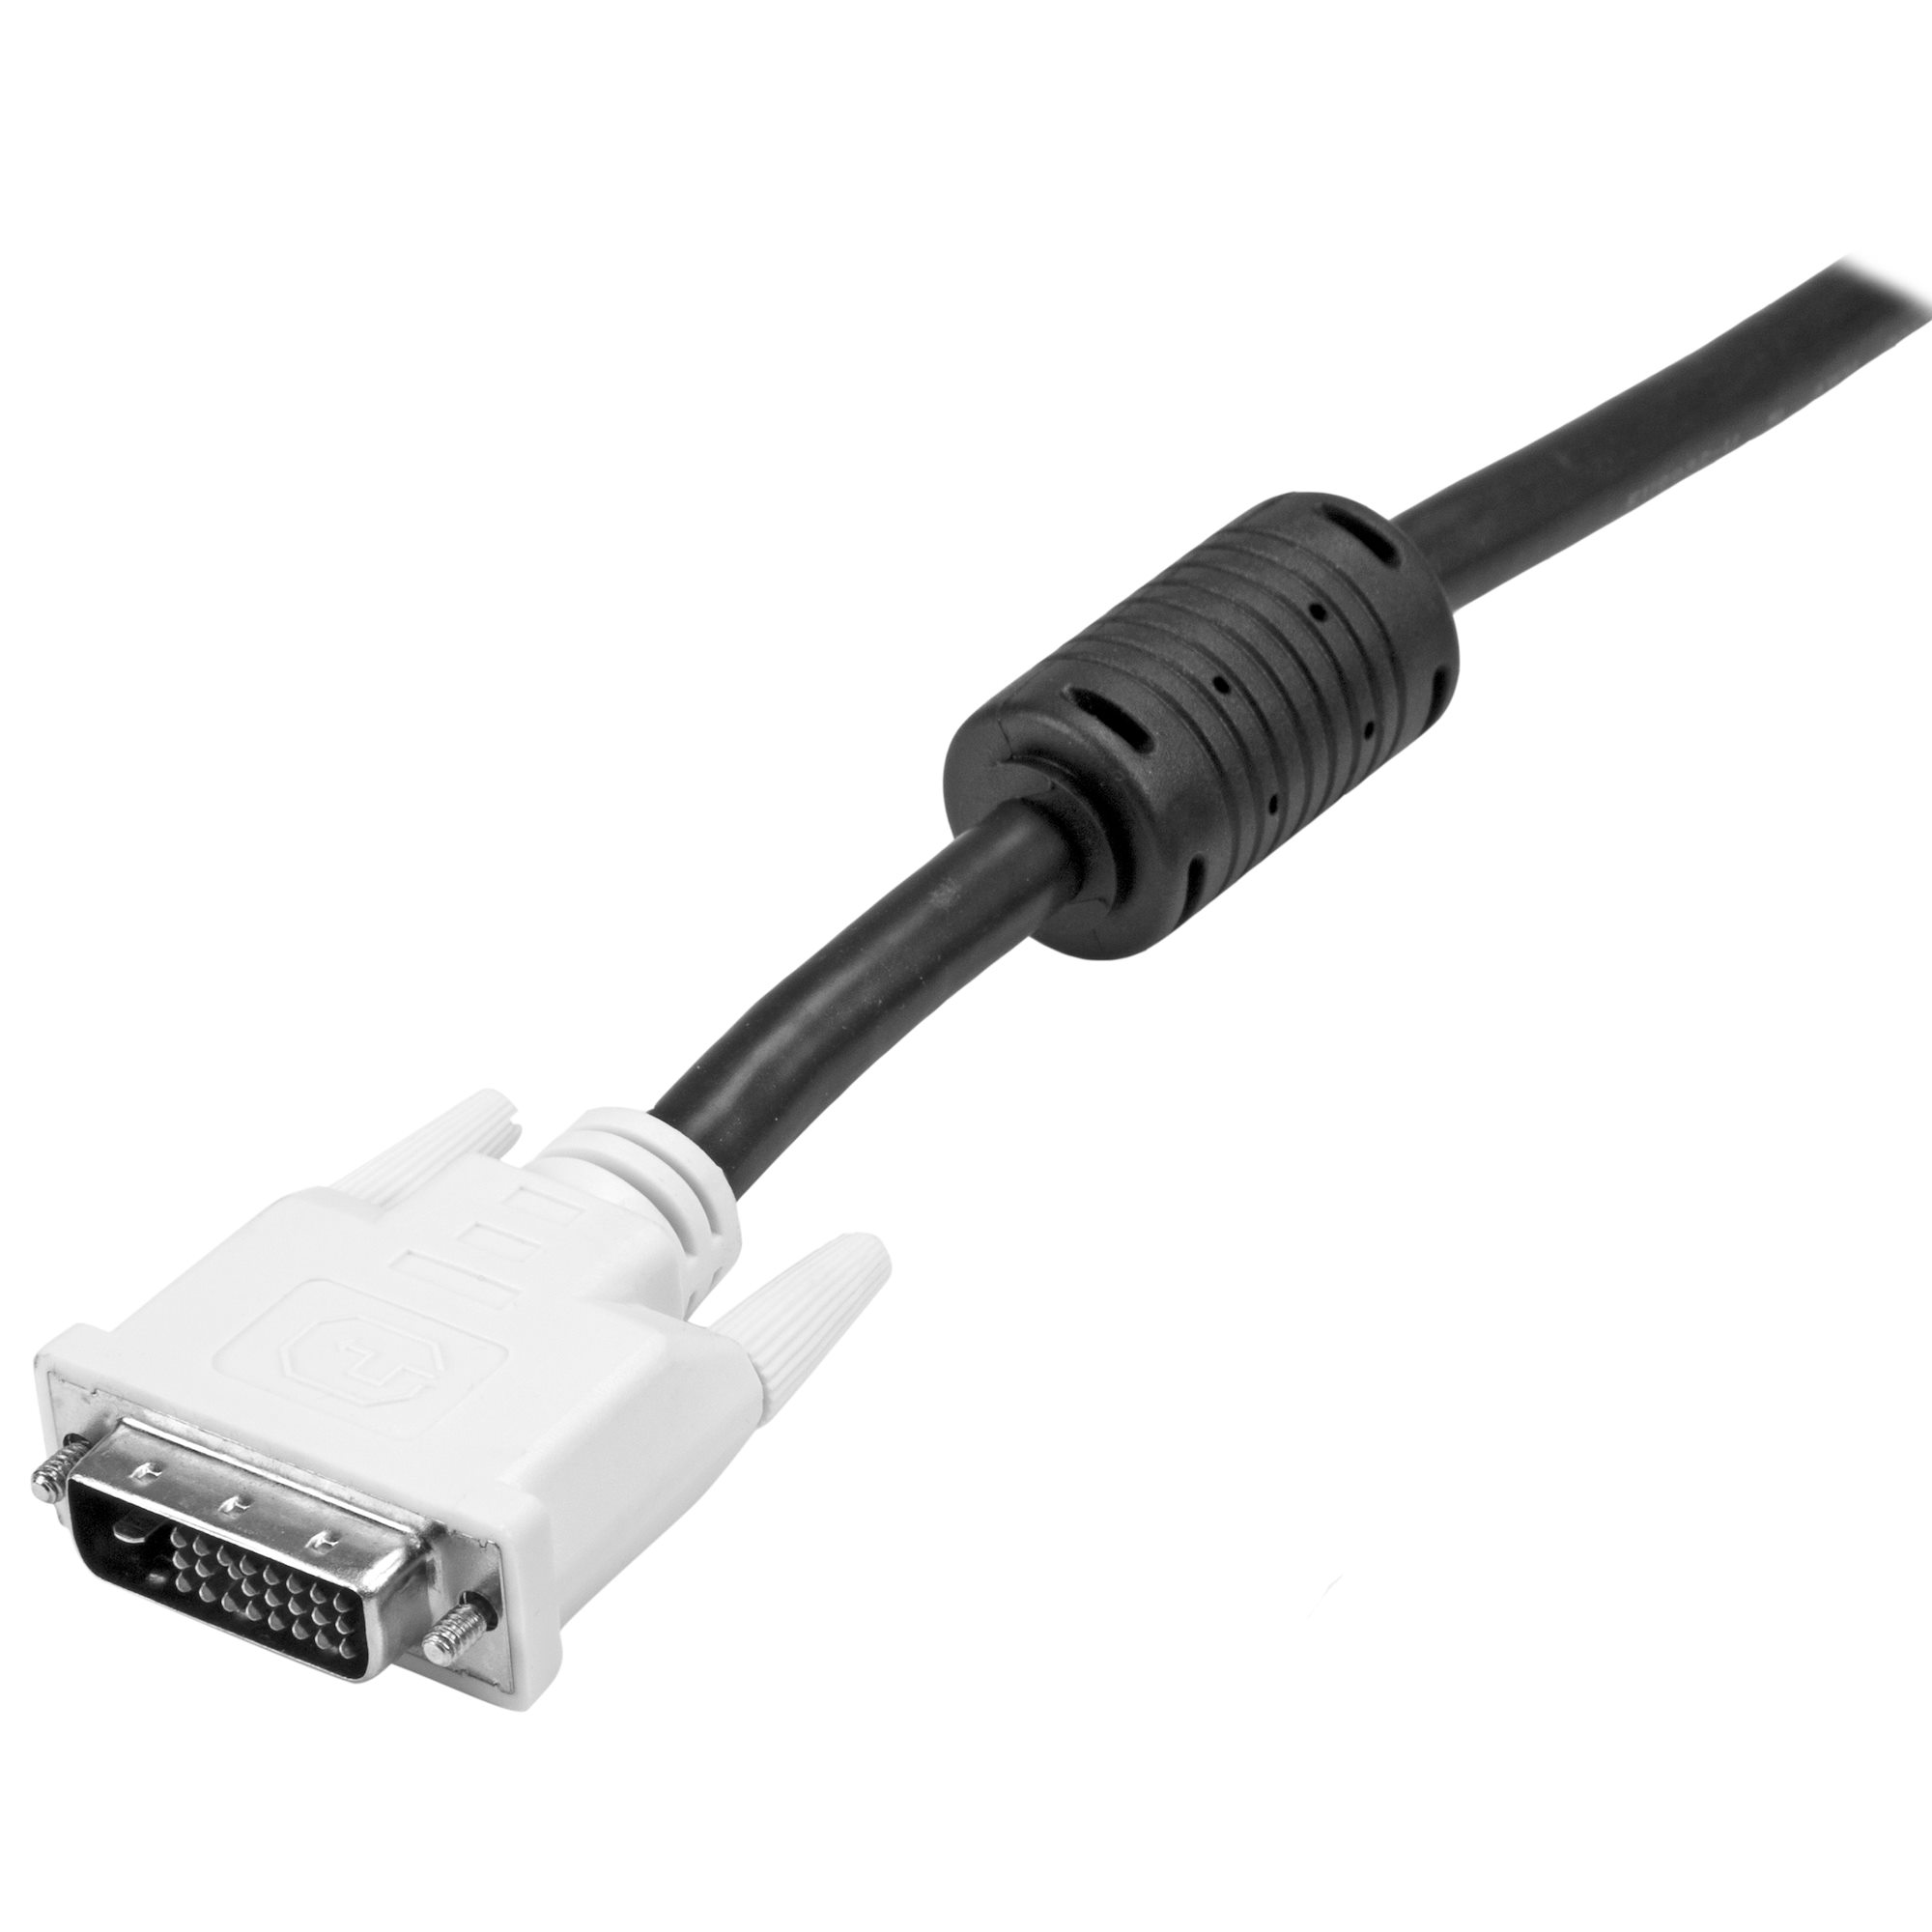 DVIDSMF6 Computer Monitor Cable 6 ft Male to Female Cable Single Link 1920x1200 StarTech.com DVI Extension Cable DVI-D Cable DVI Cord 